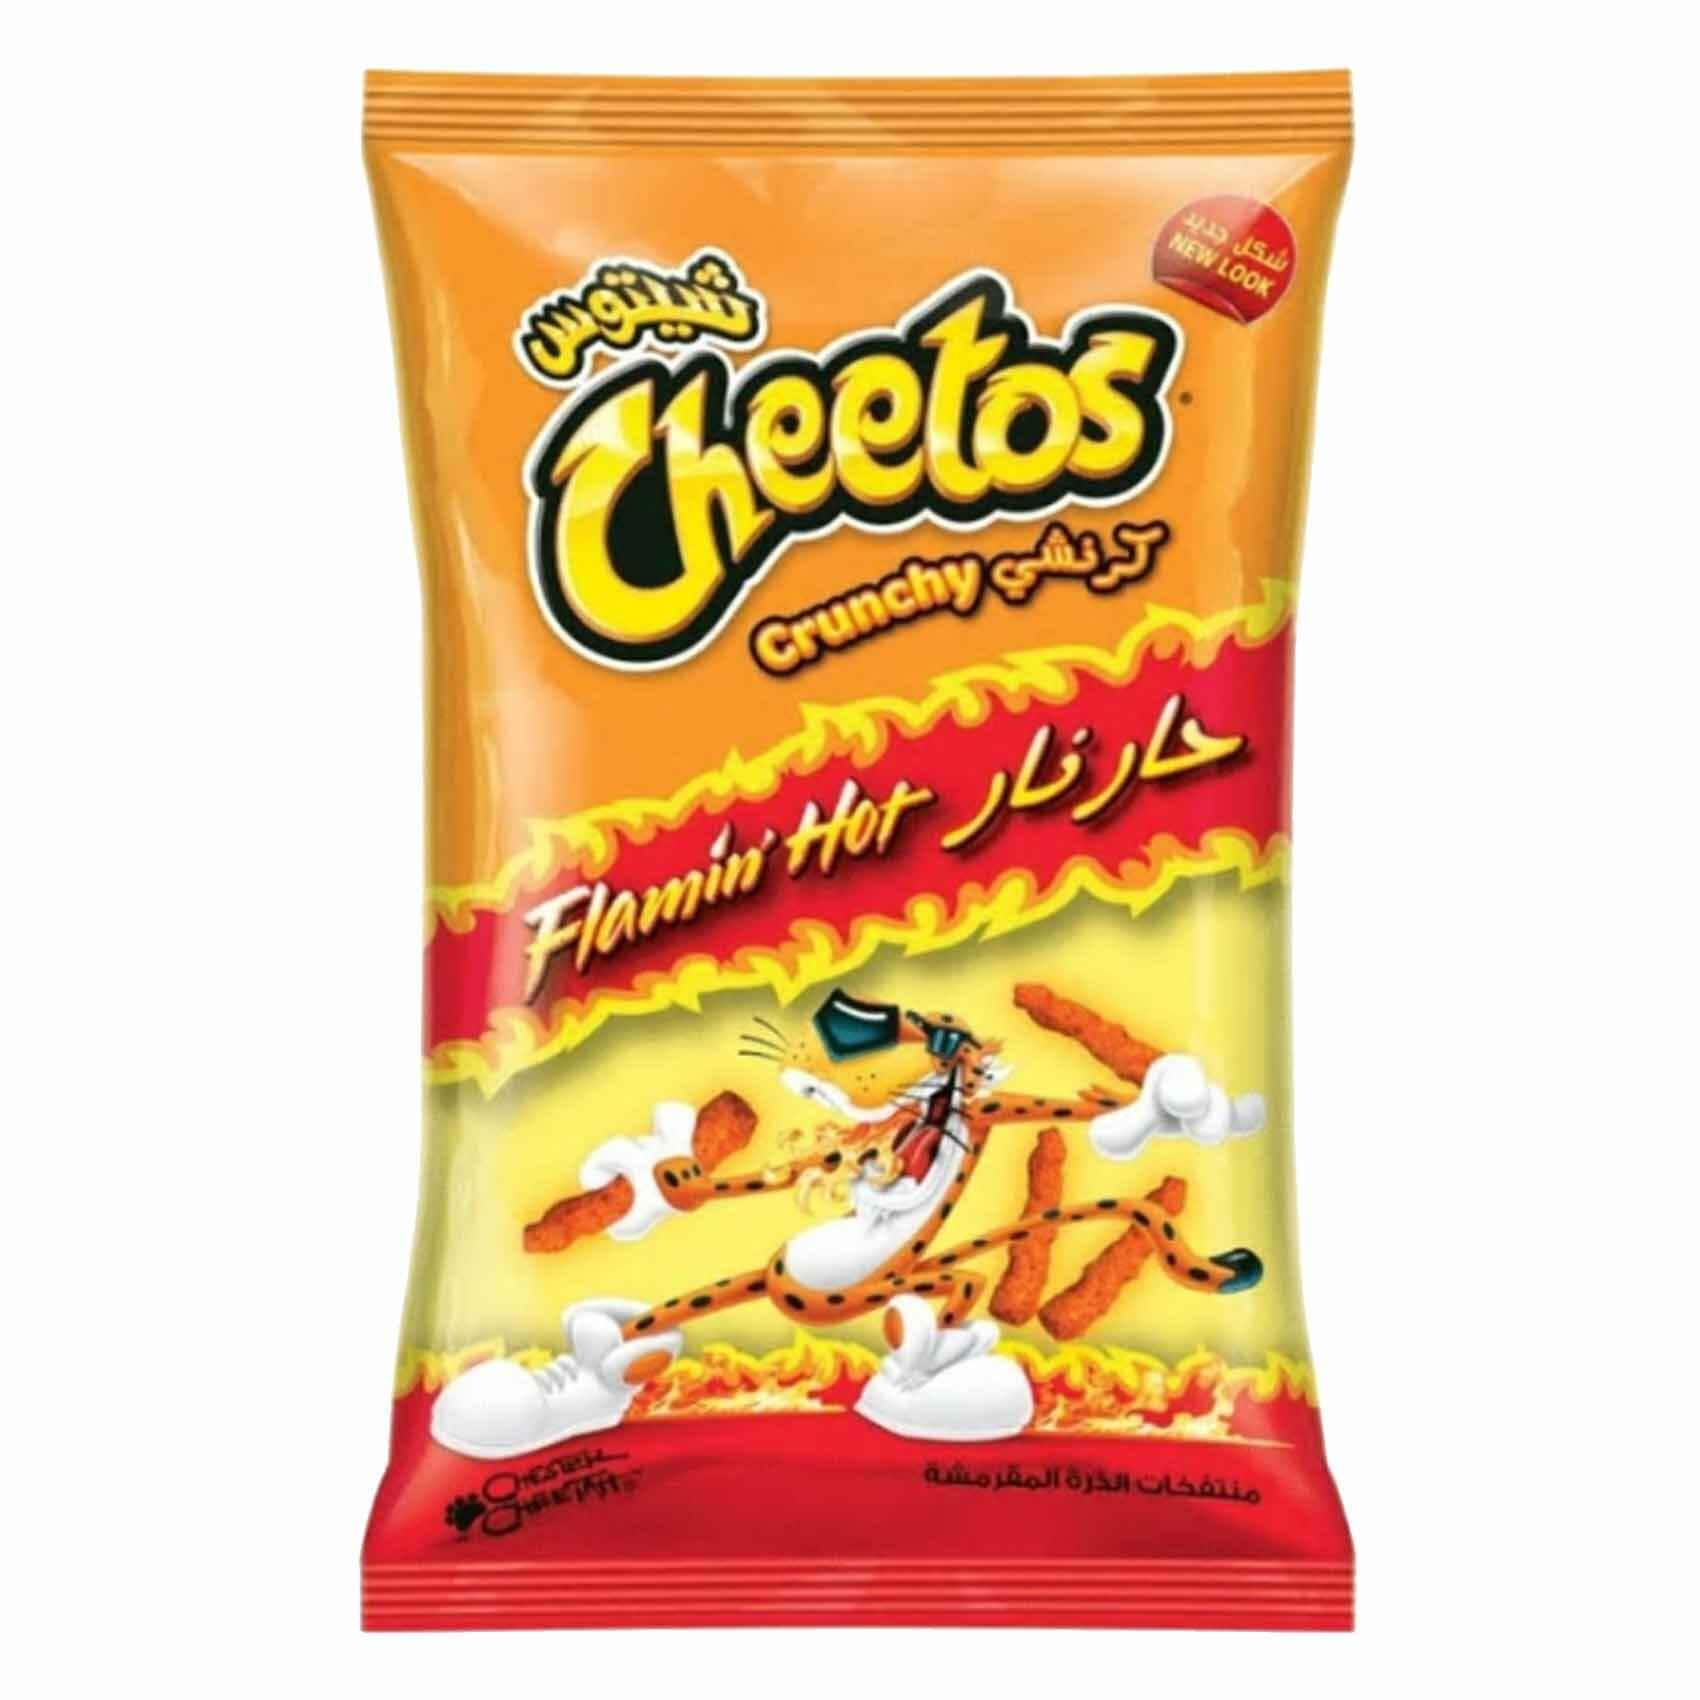 Buy Cheetos Flaming Hot Chips 205g Online Shop Food Cupboard On Carrefour Uae